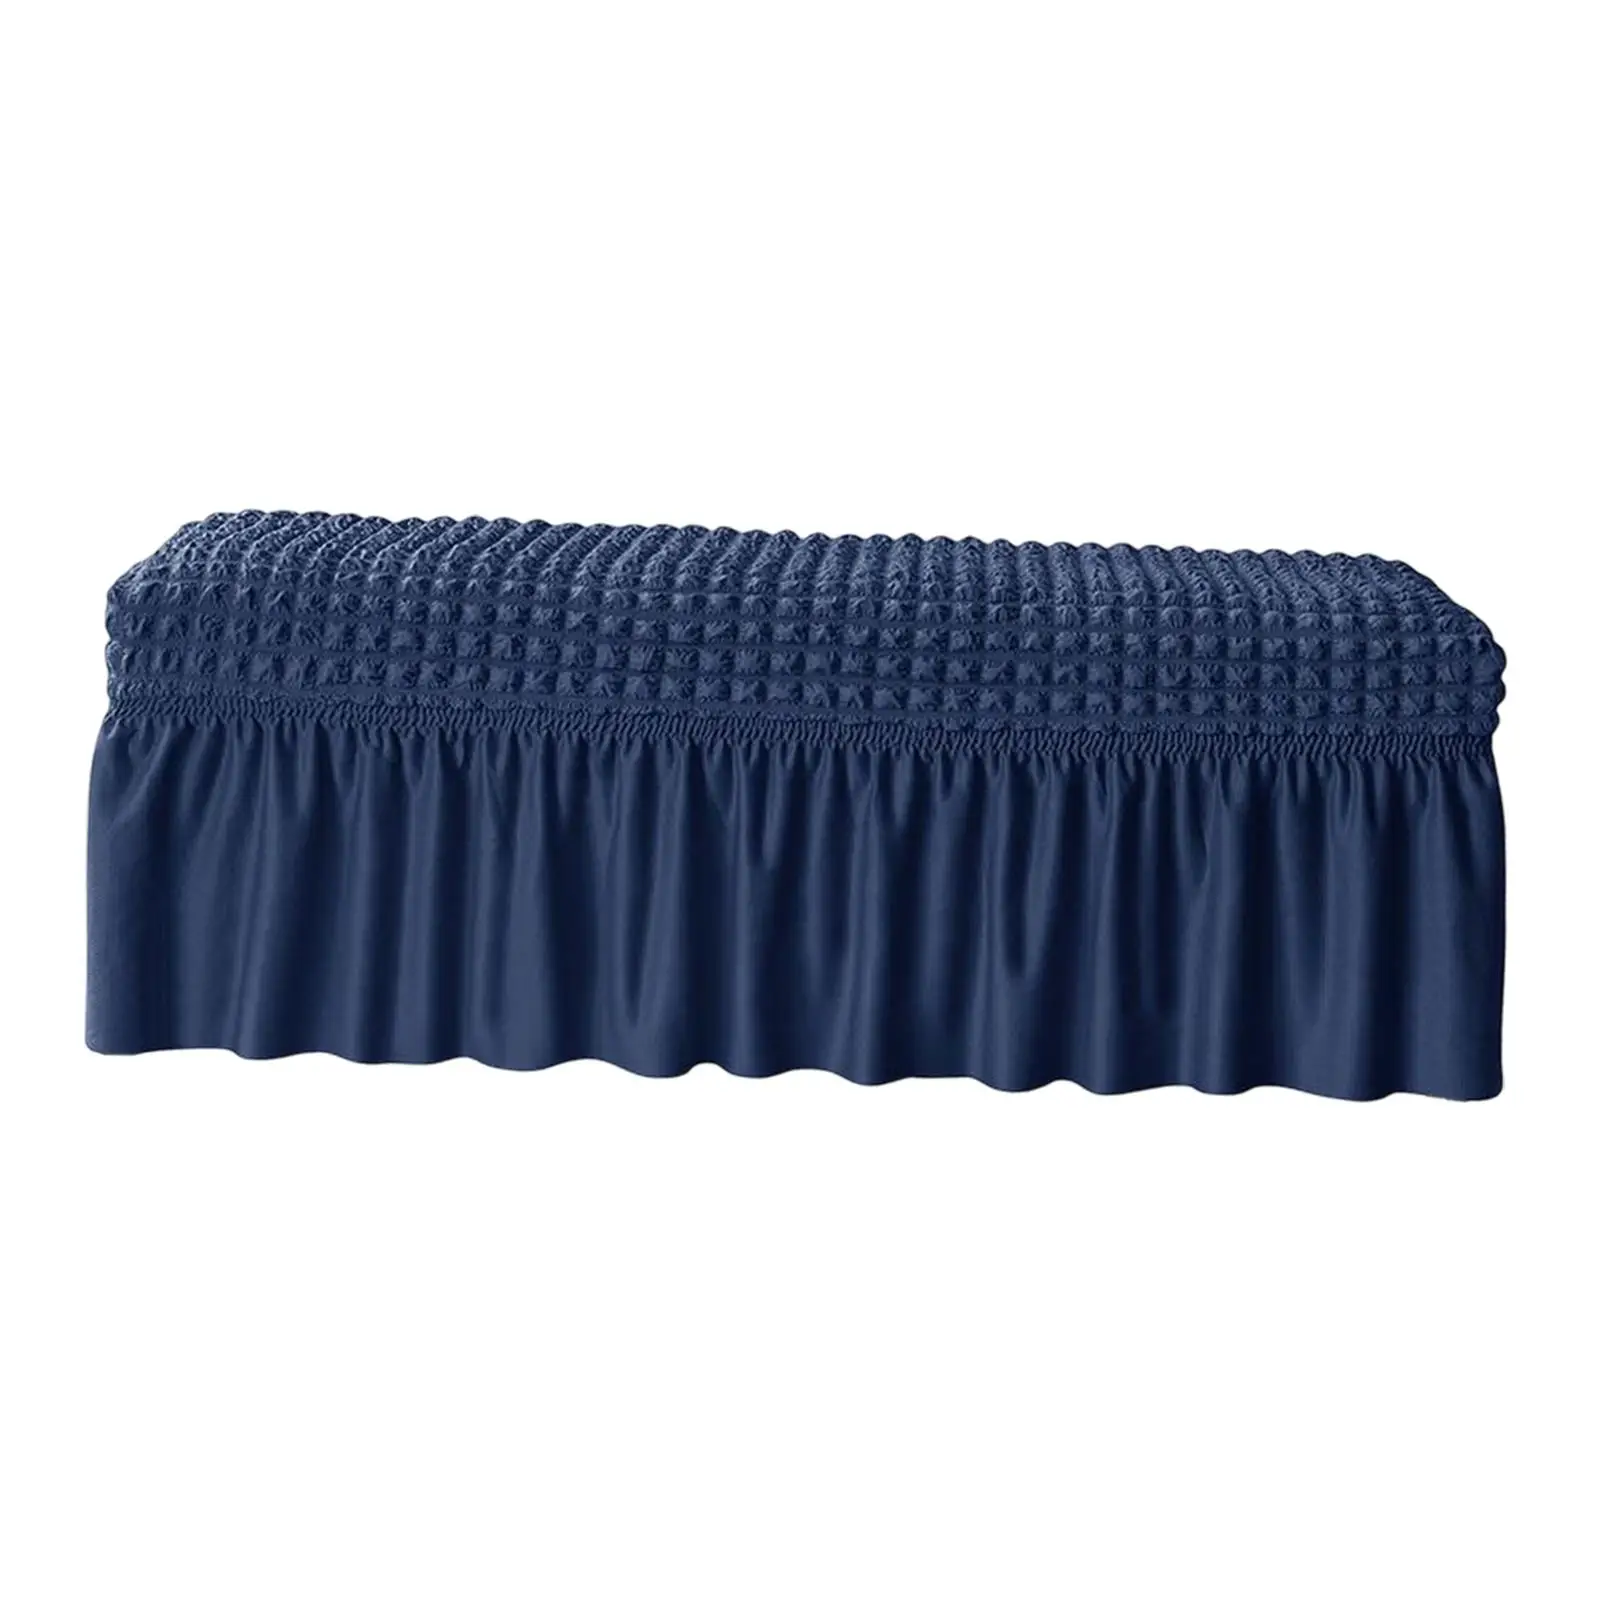 Dining Bench Cover Bench Seat Furniture Protector Soft Washable Dining Bench Protector for Bedroom Restaurant Living Room Hotel